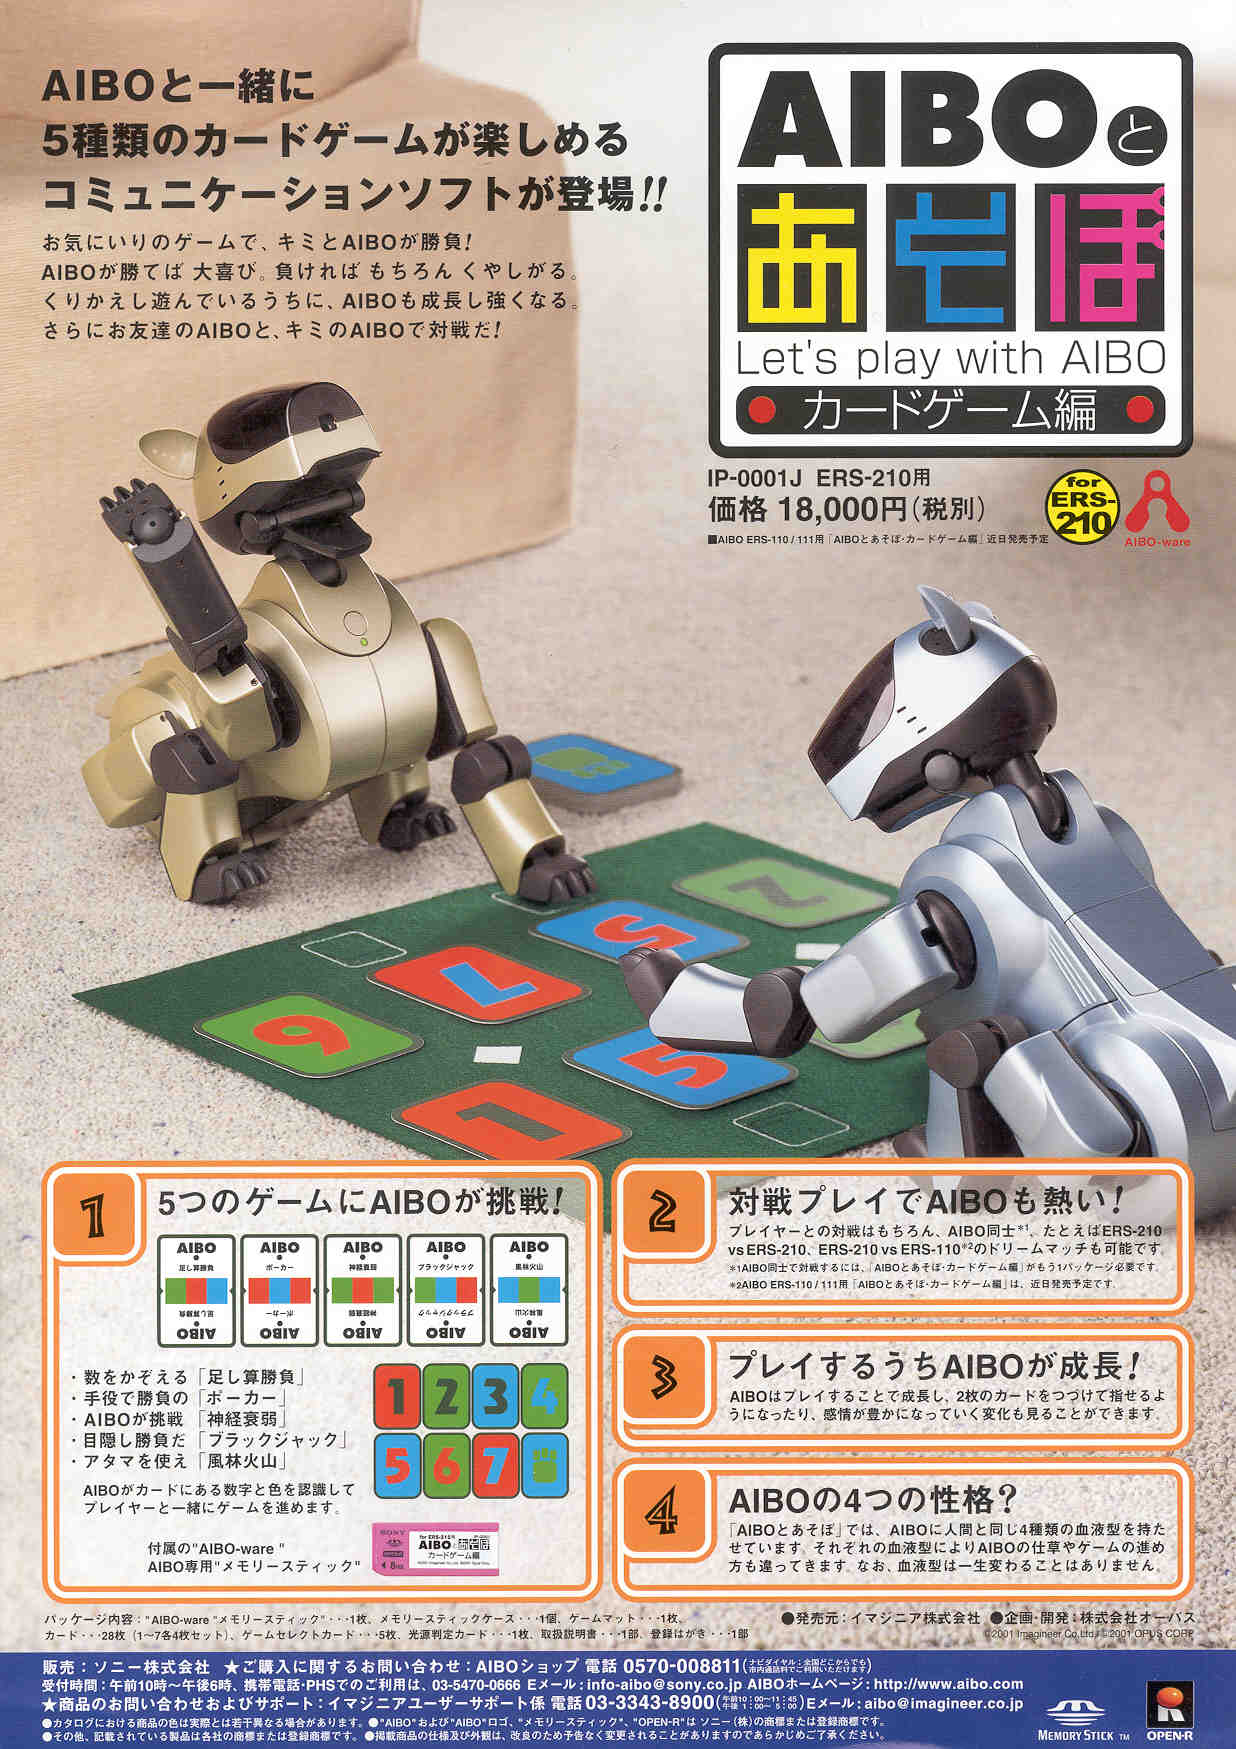 Let's play with Aibo